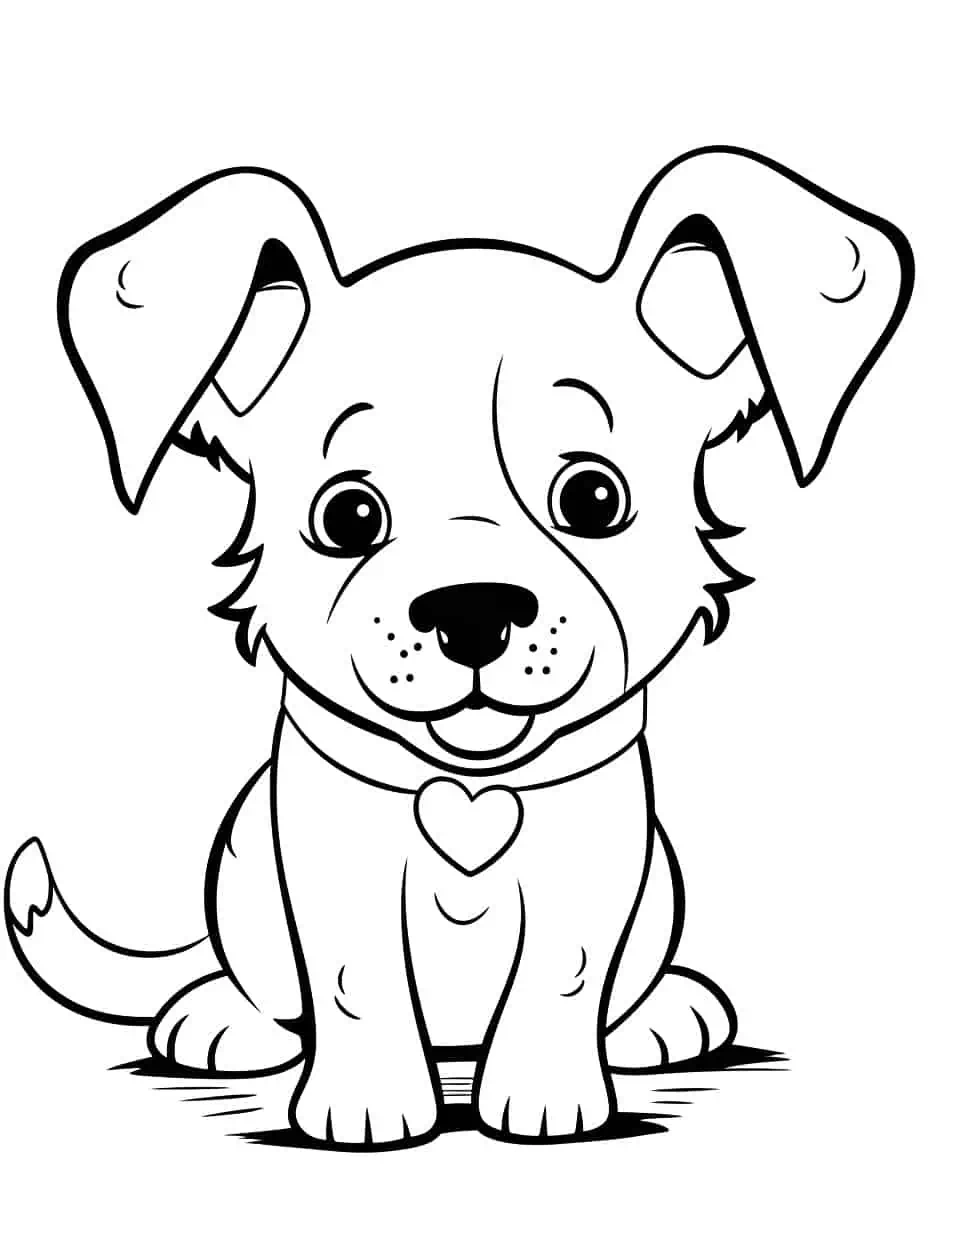 Kawaii Border Collie Coloring Page - A cute and cuddly Border Collie in kawaii style.